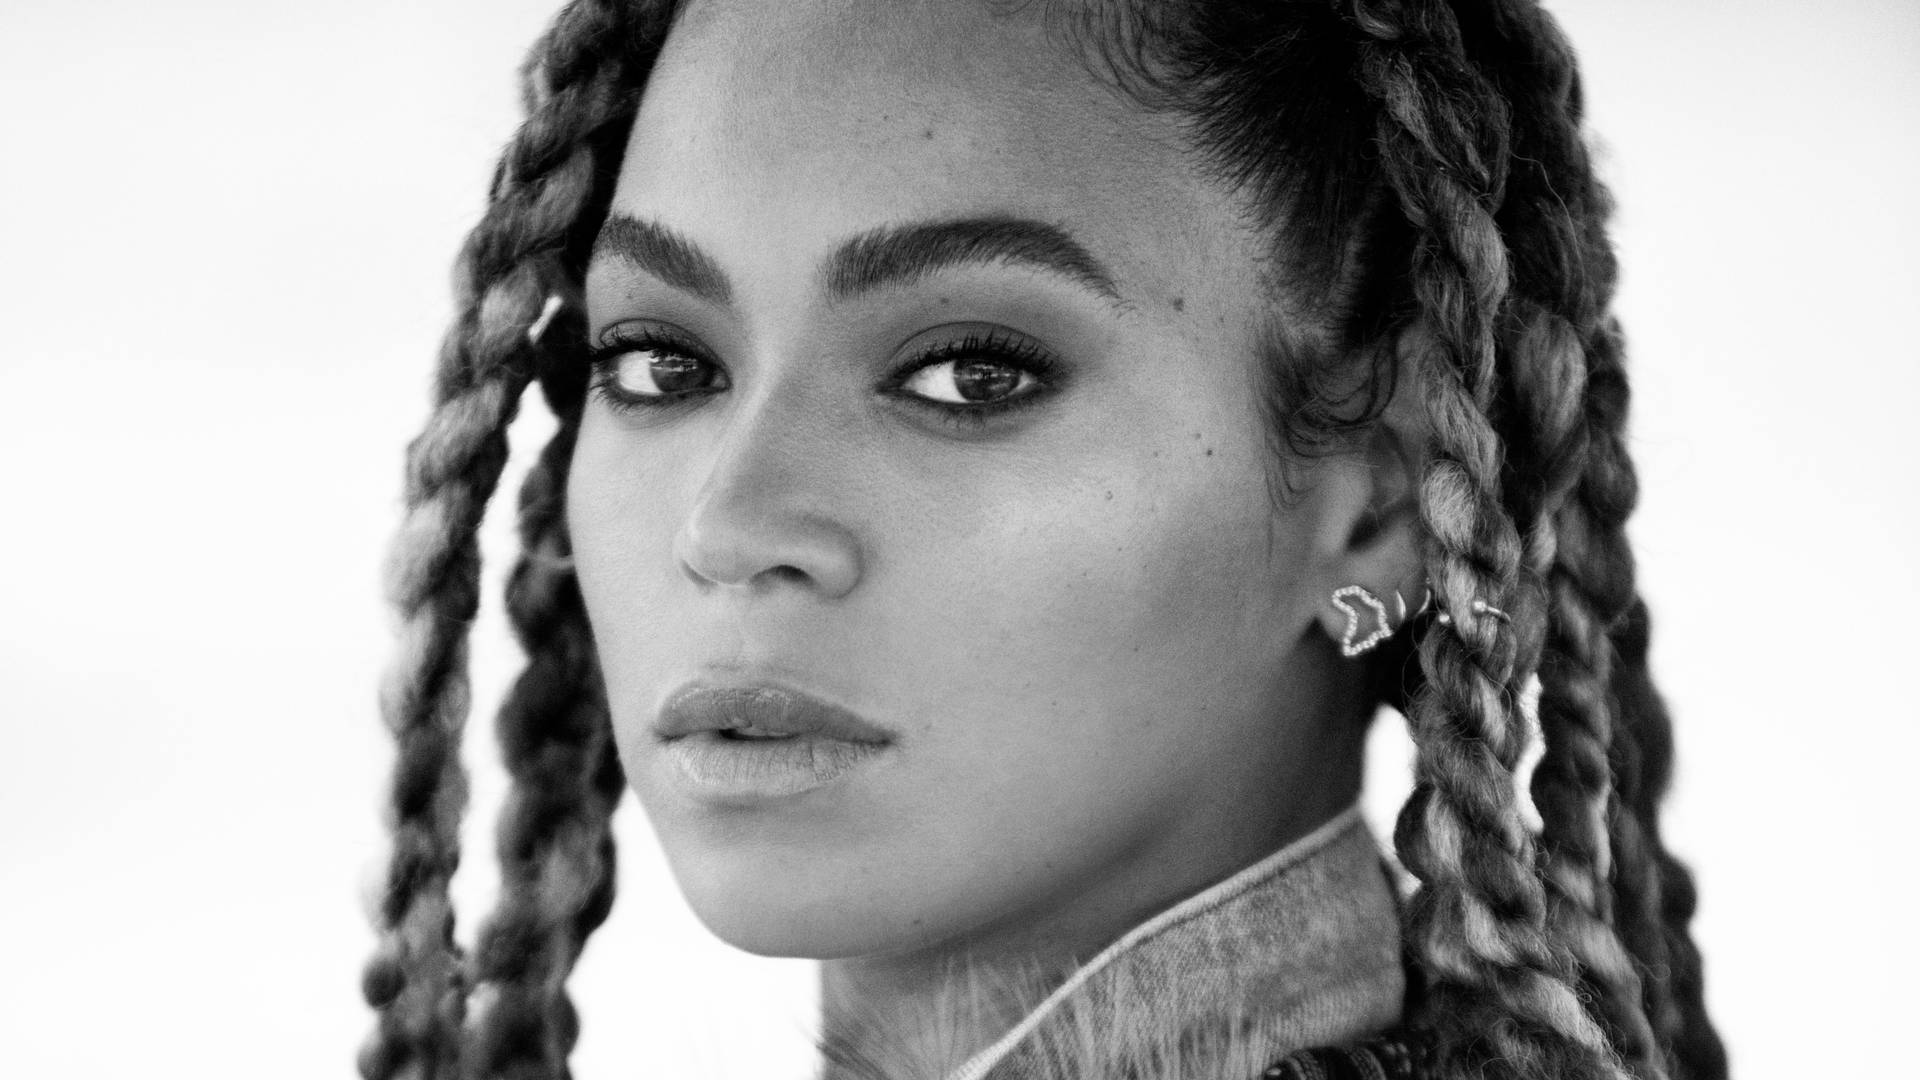 Beyonce Wears Her Signature Braids With Statement Earrings Background